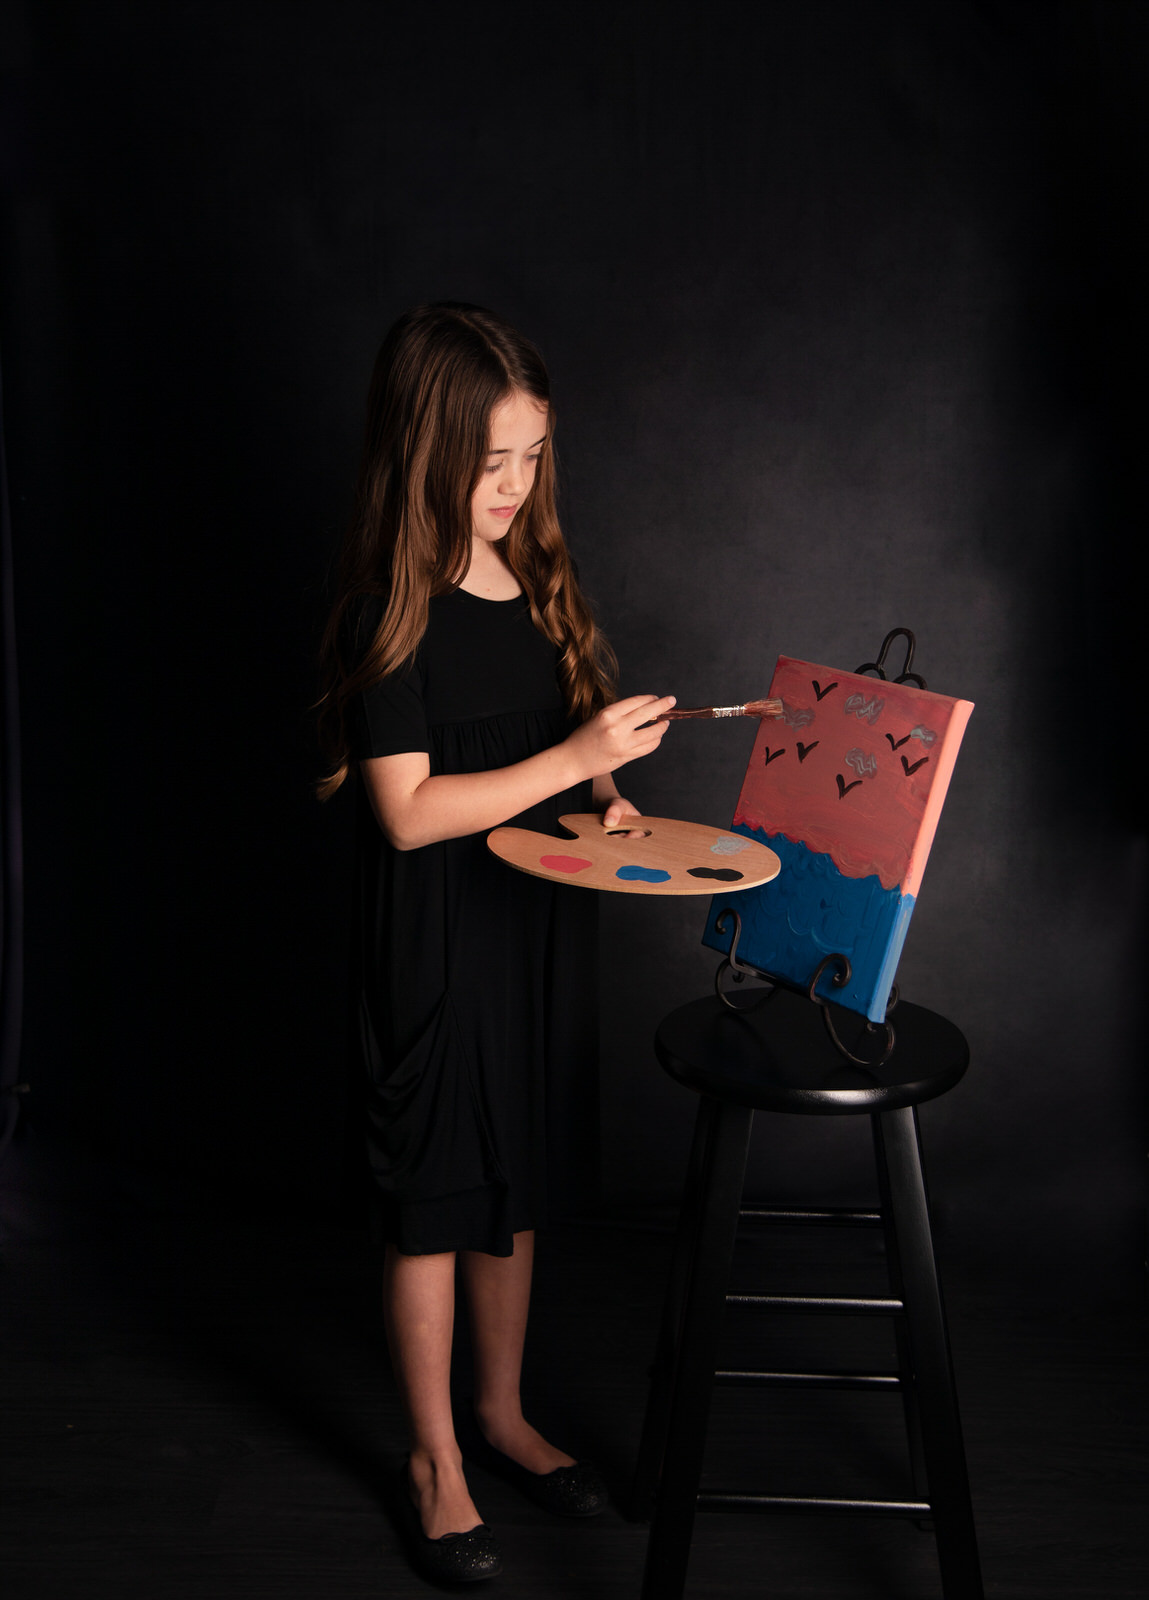 A young girl in a black dress stands in a studio painting an ocean on an easel fort worth toy stores